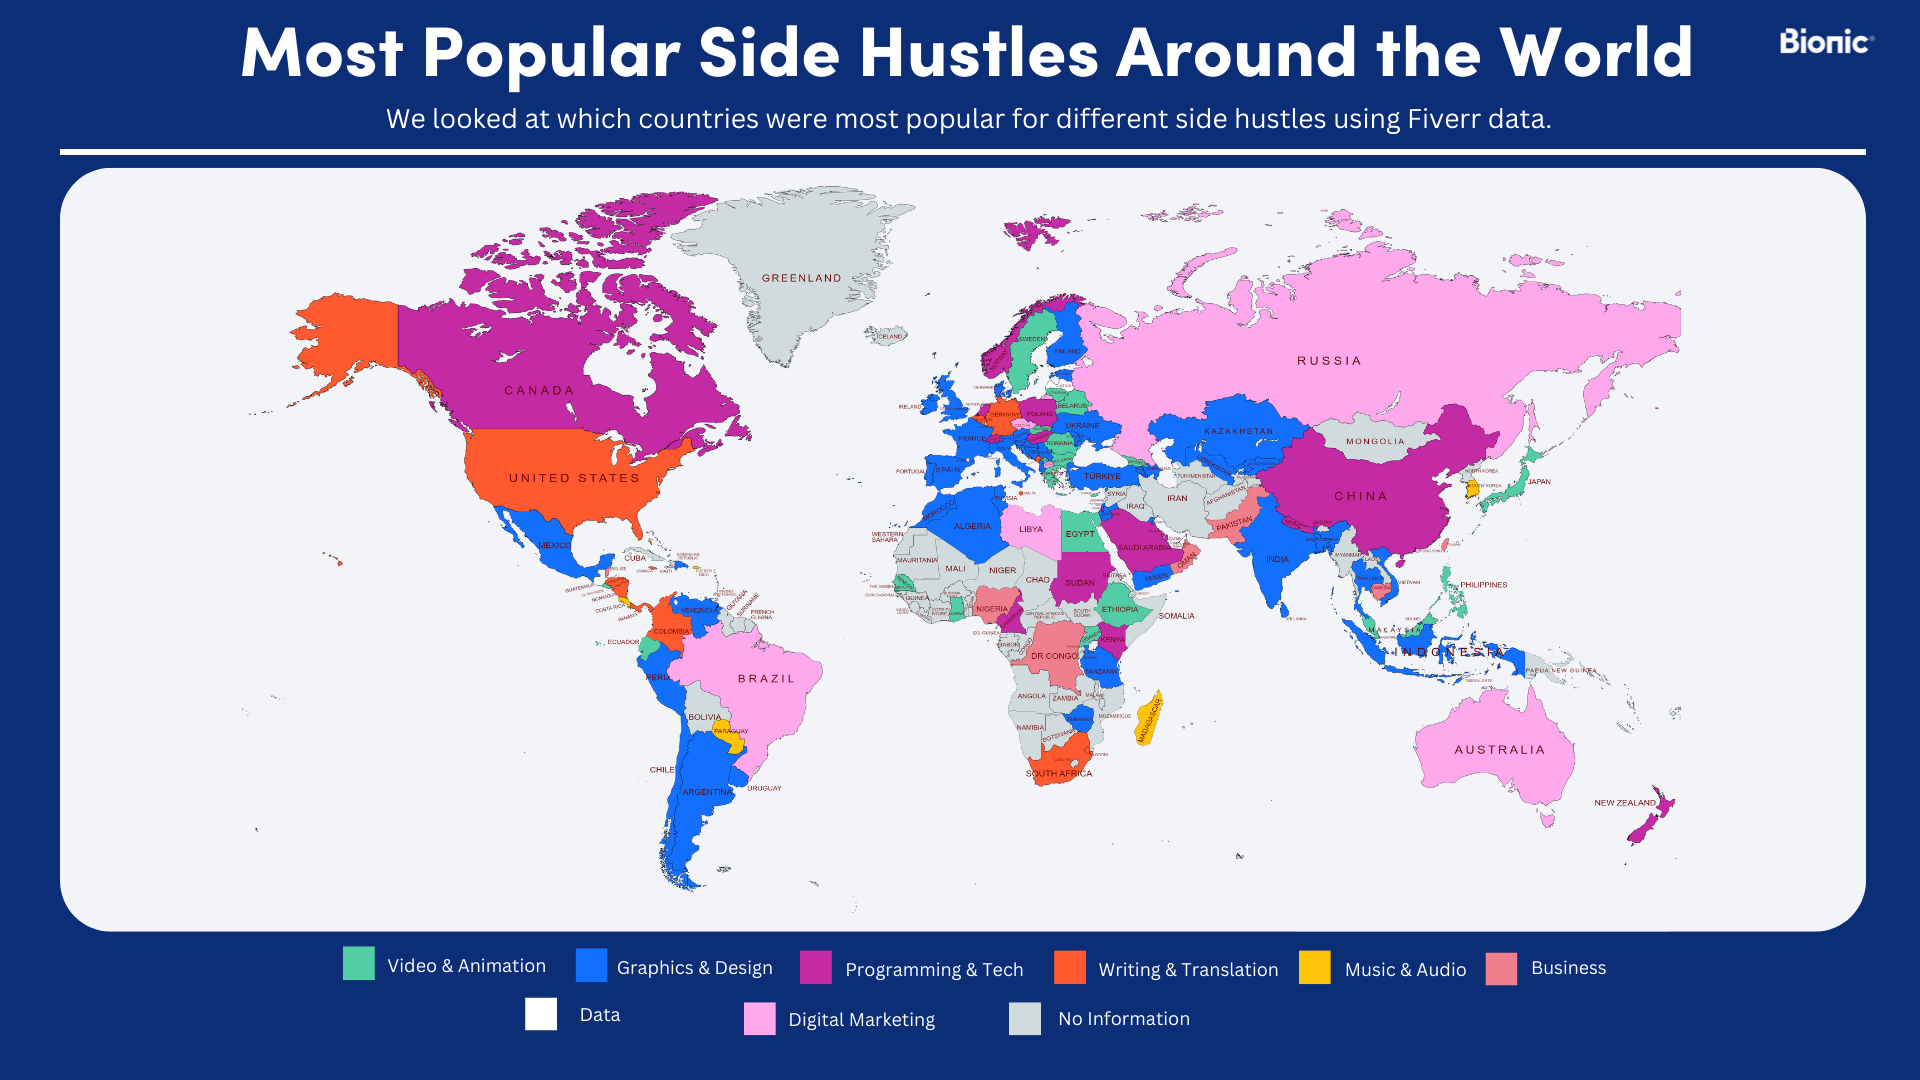 Map of the world showing the most popular side hustles in each part of the globe.